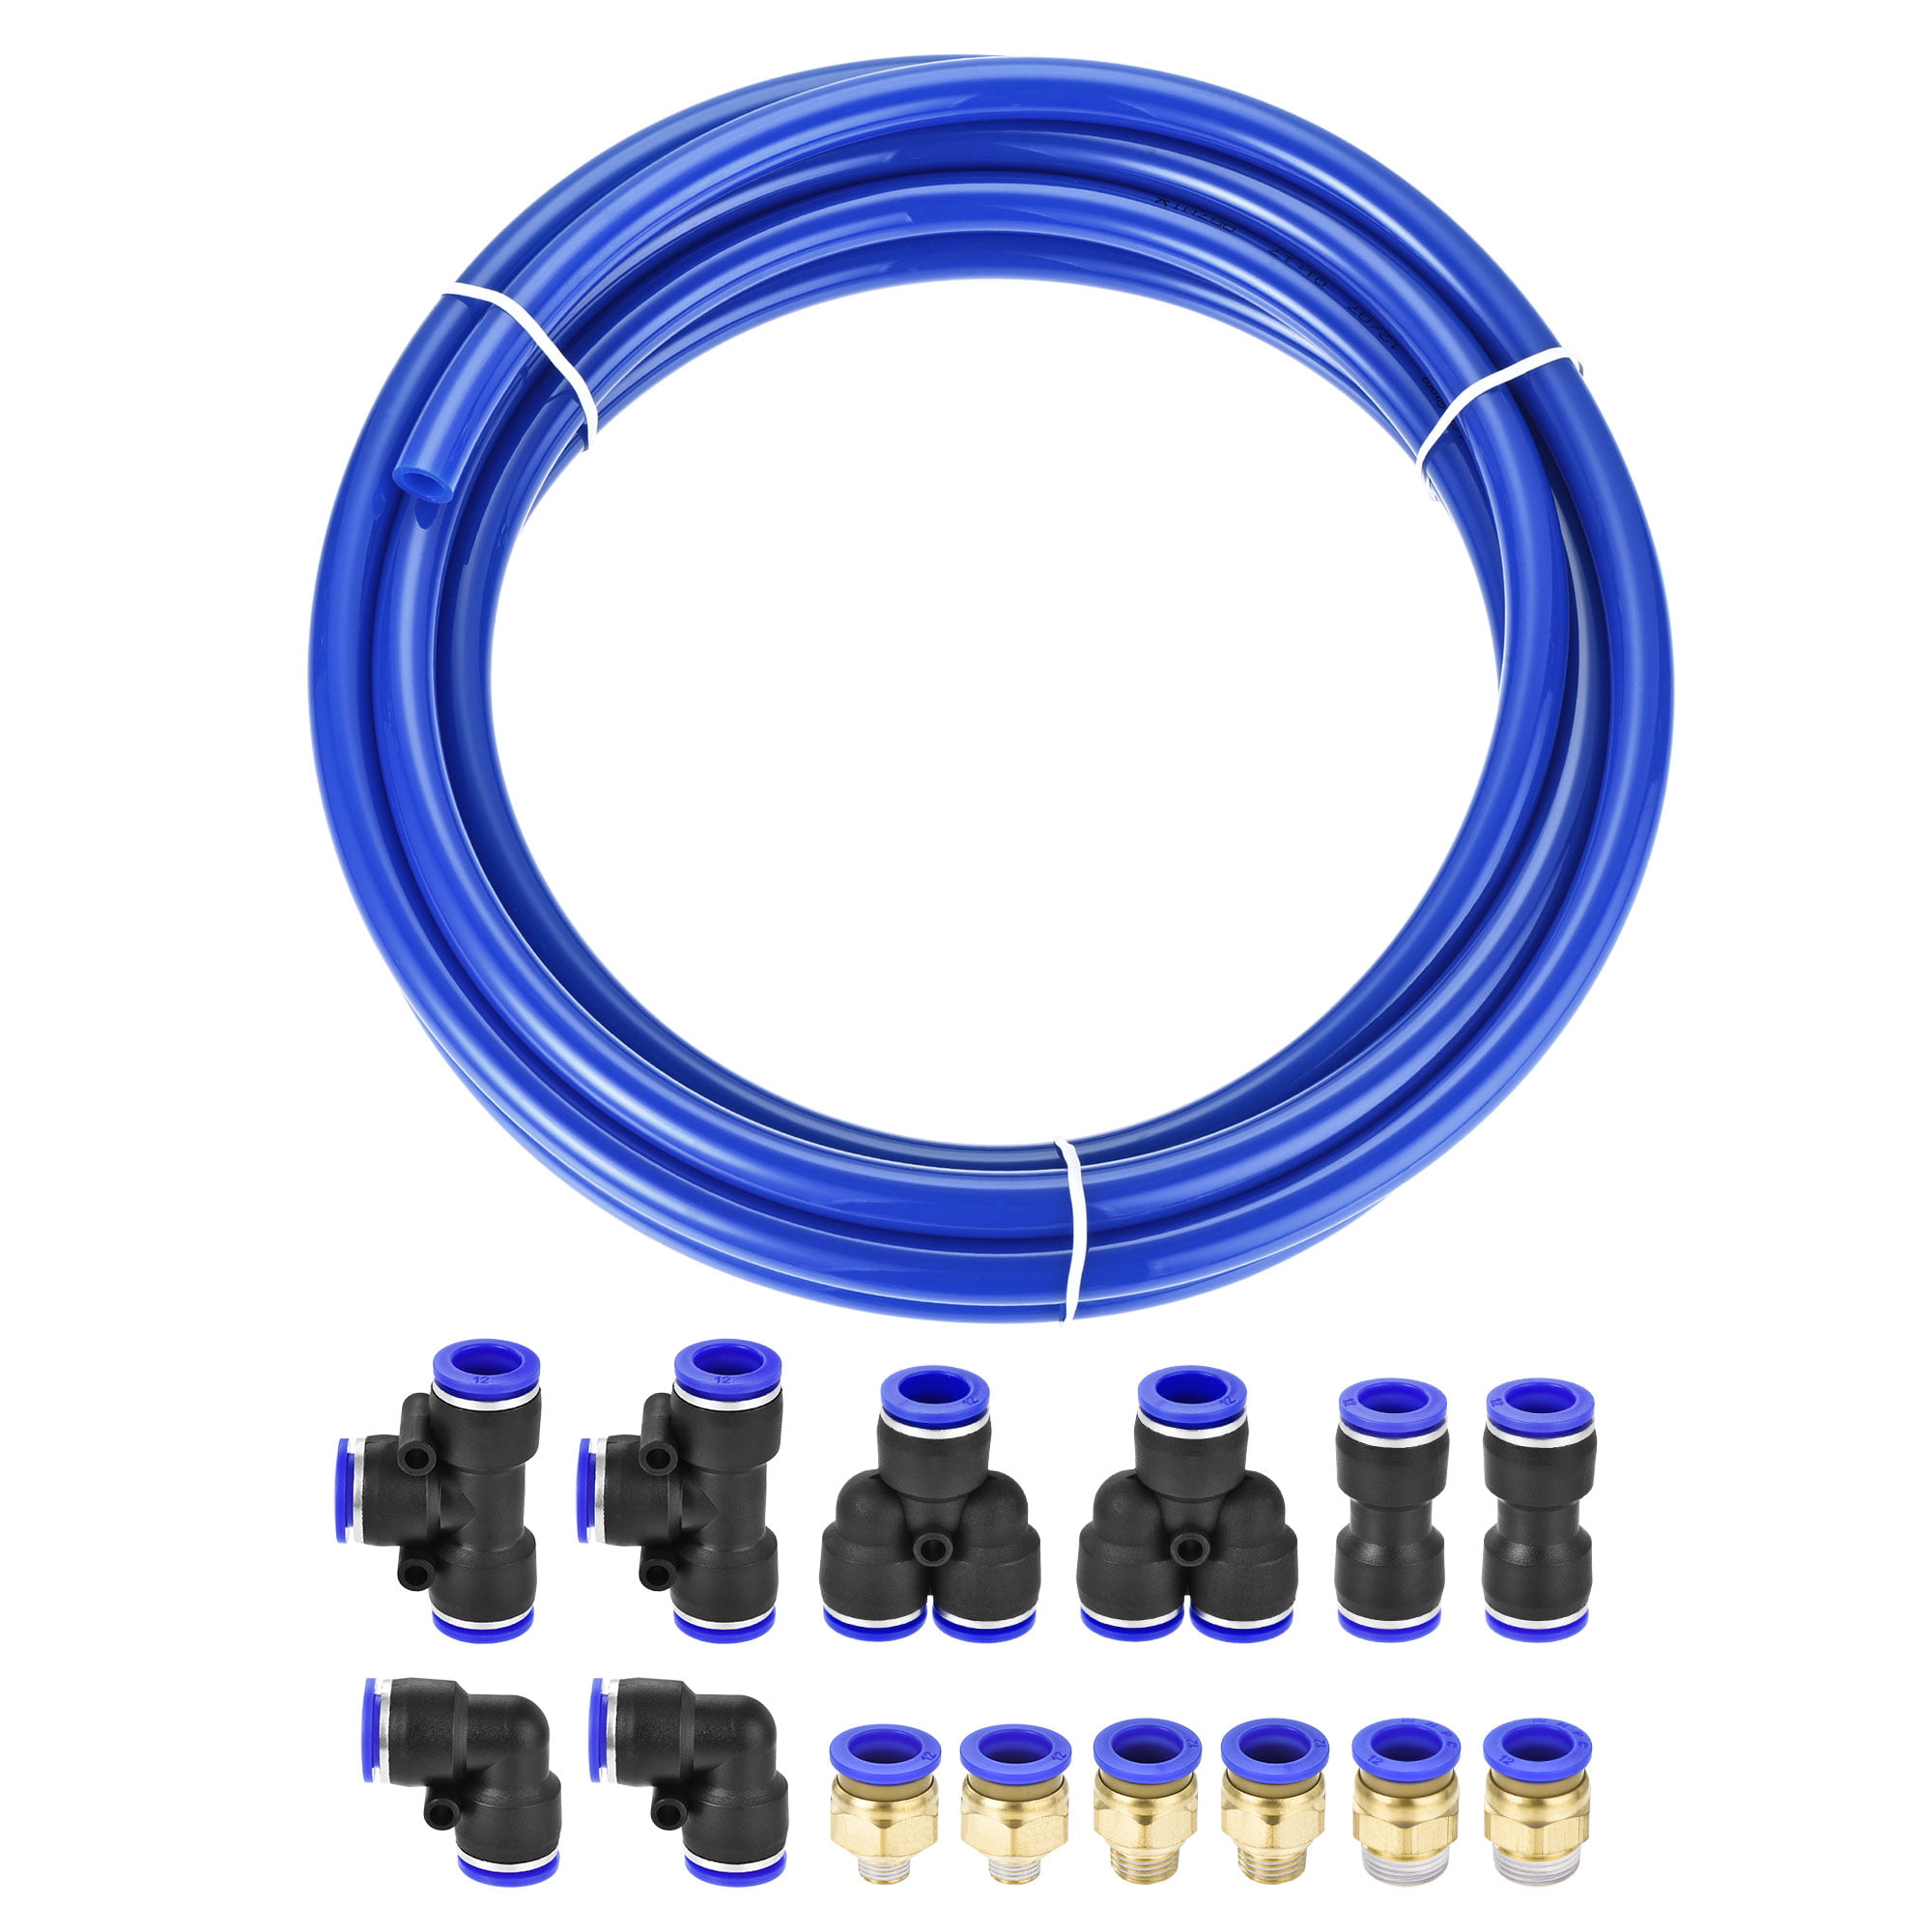 Pneumatic 8mm OD PU Air Hose Tubing Kit 5M Blue with Push to Connect Fittings 